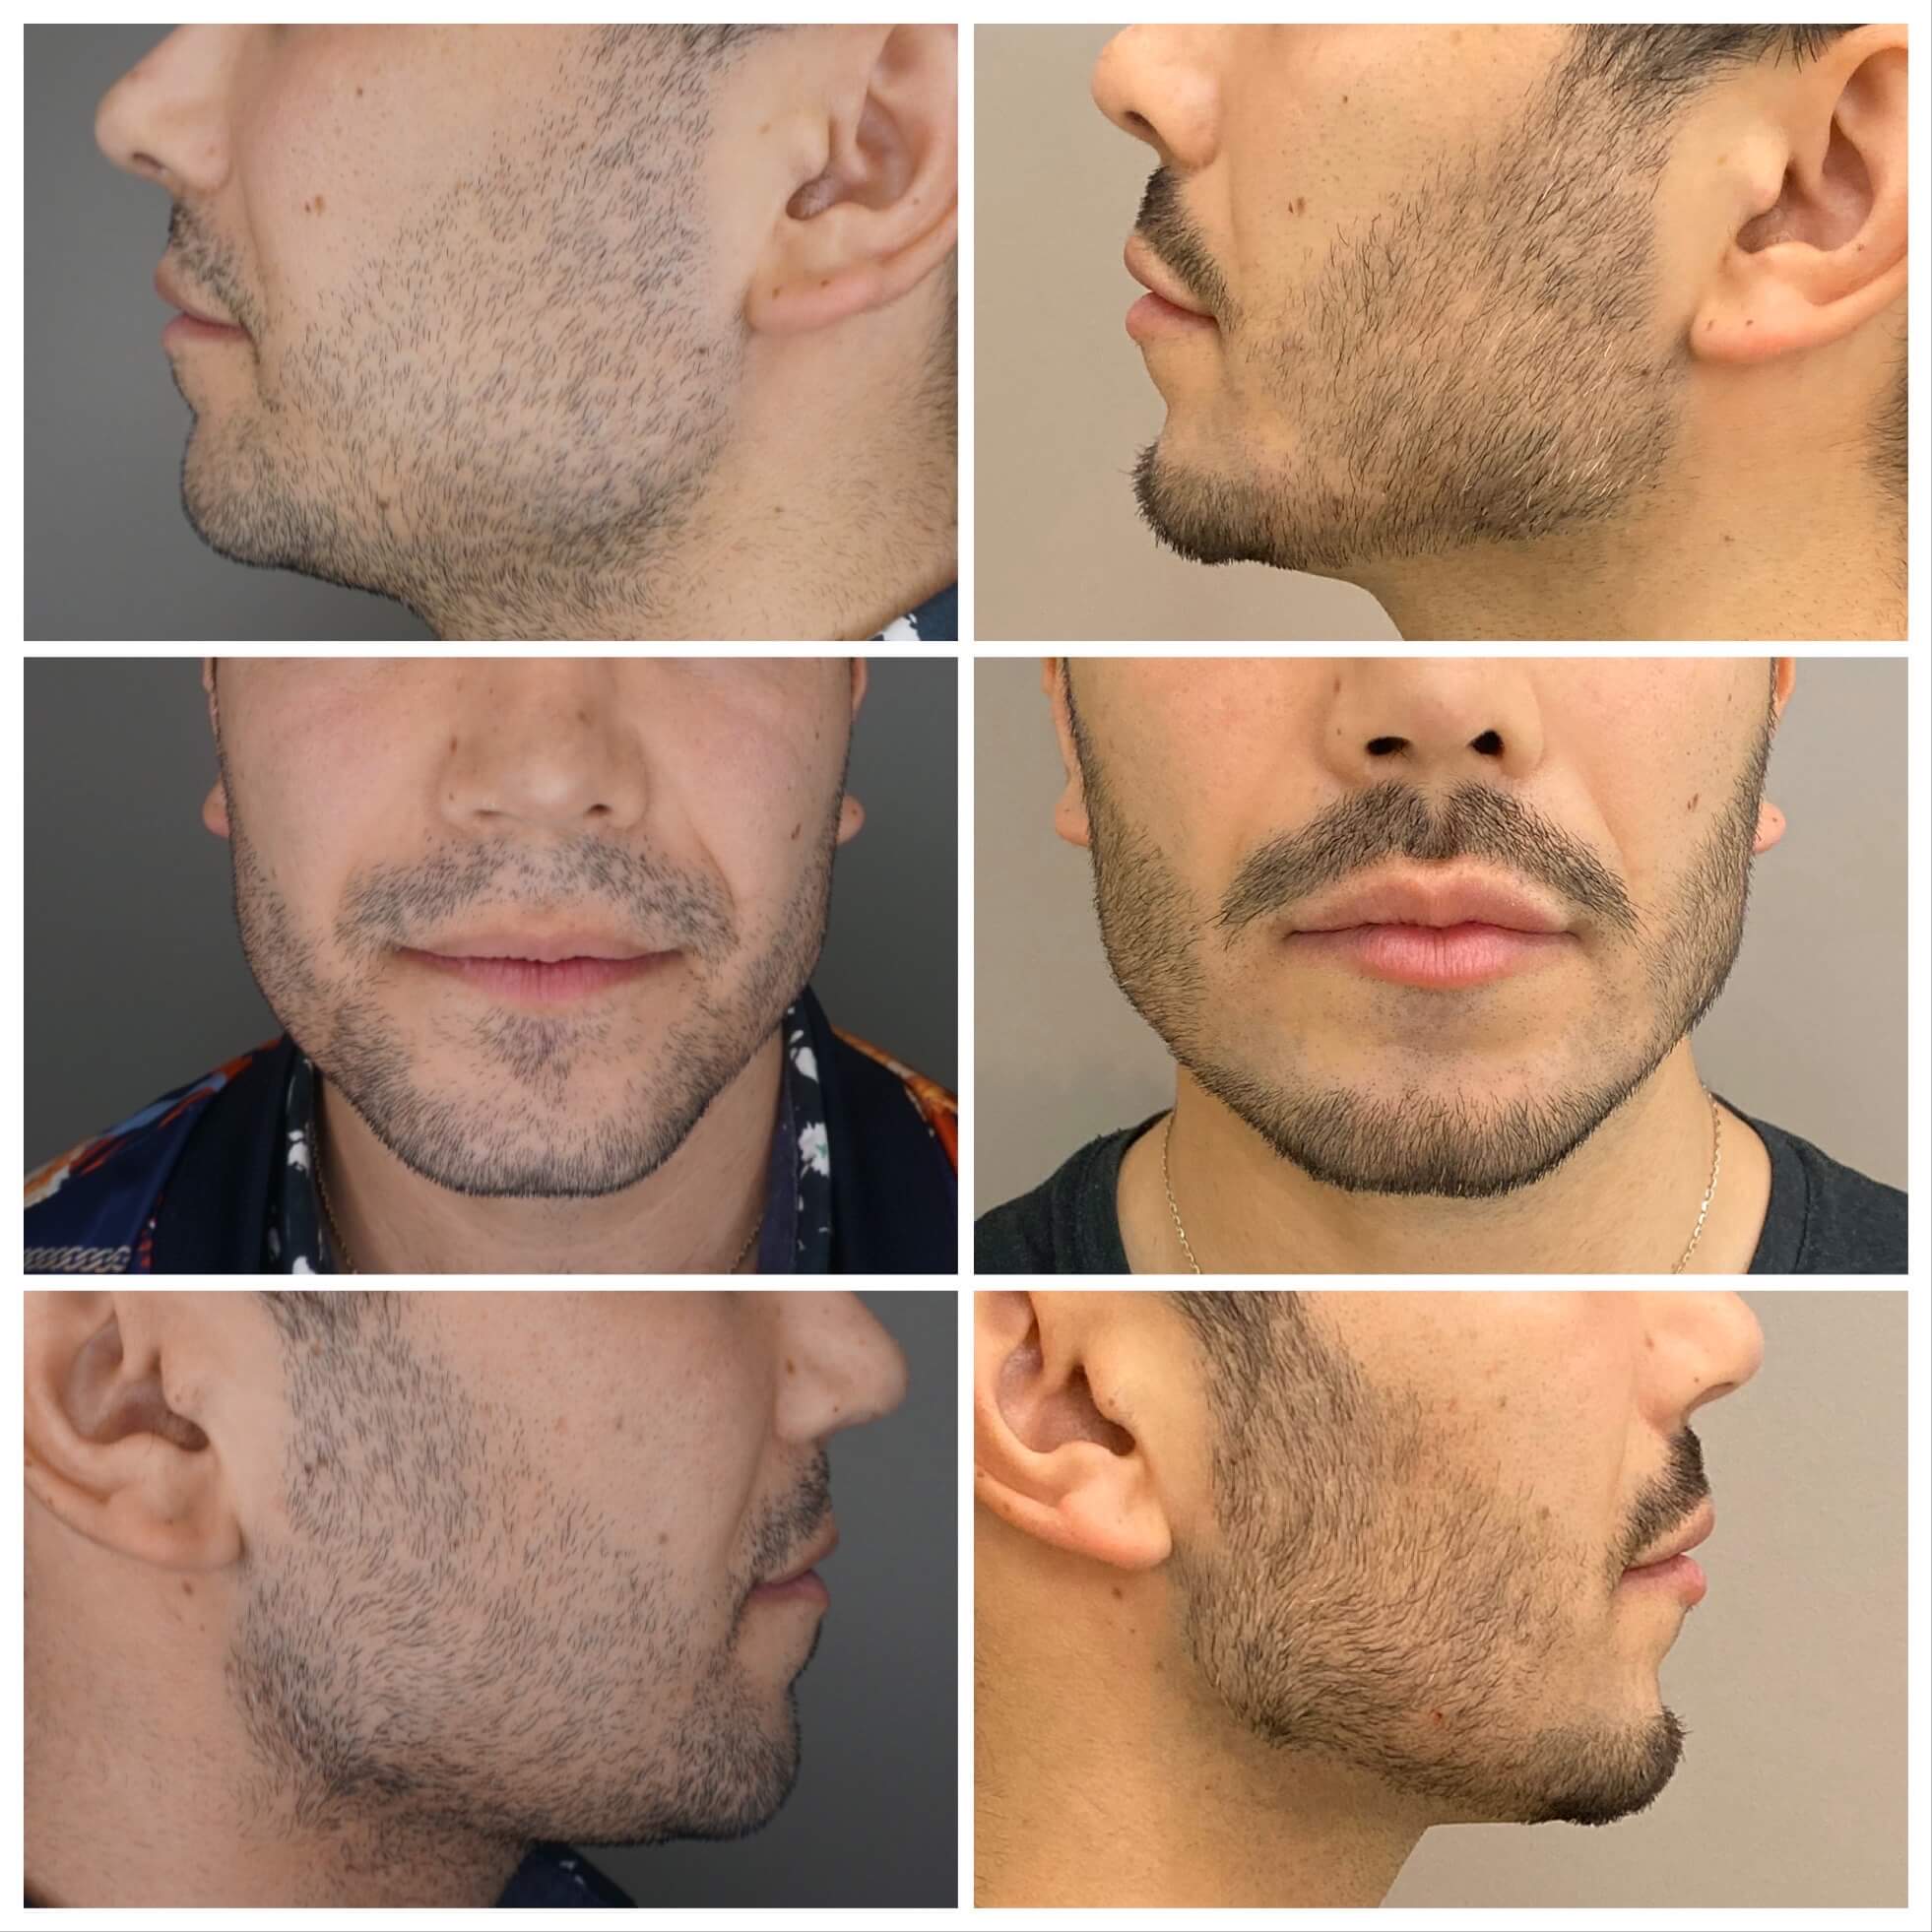 Treatment for beard of men before and after